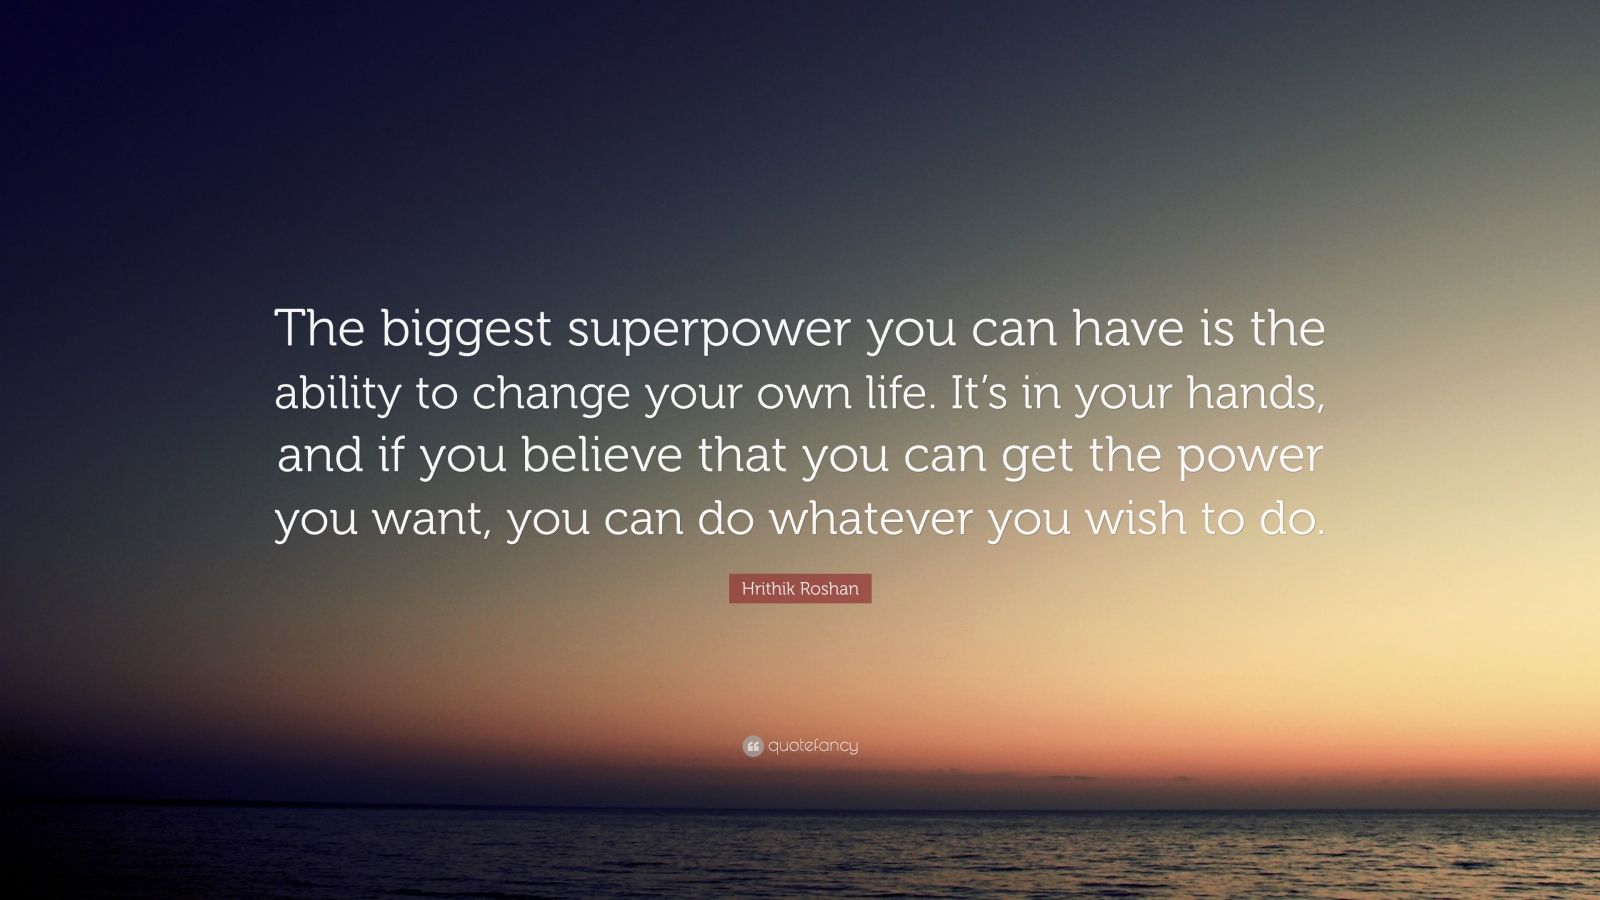 Hrithik Roshan Quote: “The biggest superpower you can have is the ...